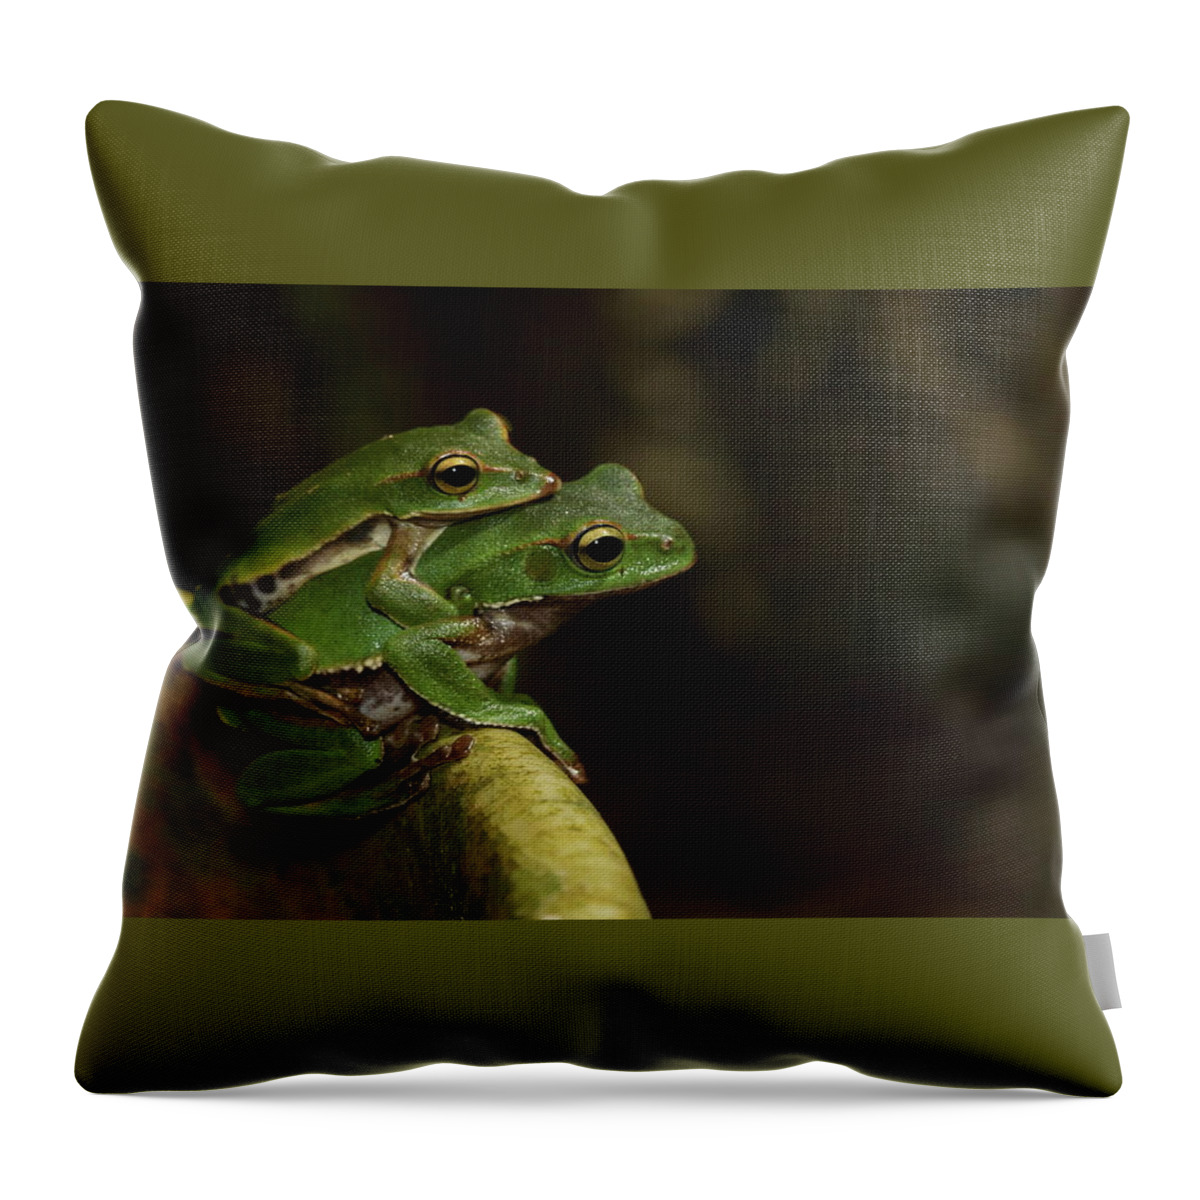 Tree Frog Throw Pillow featuring the digital art Tree Frog by Super Lovely